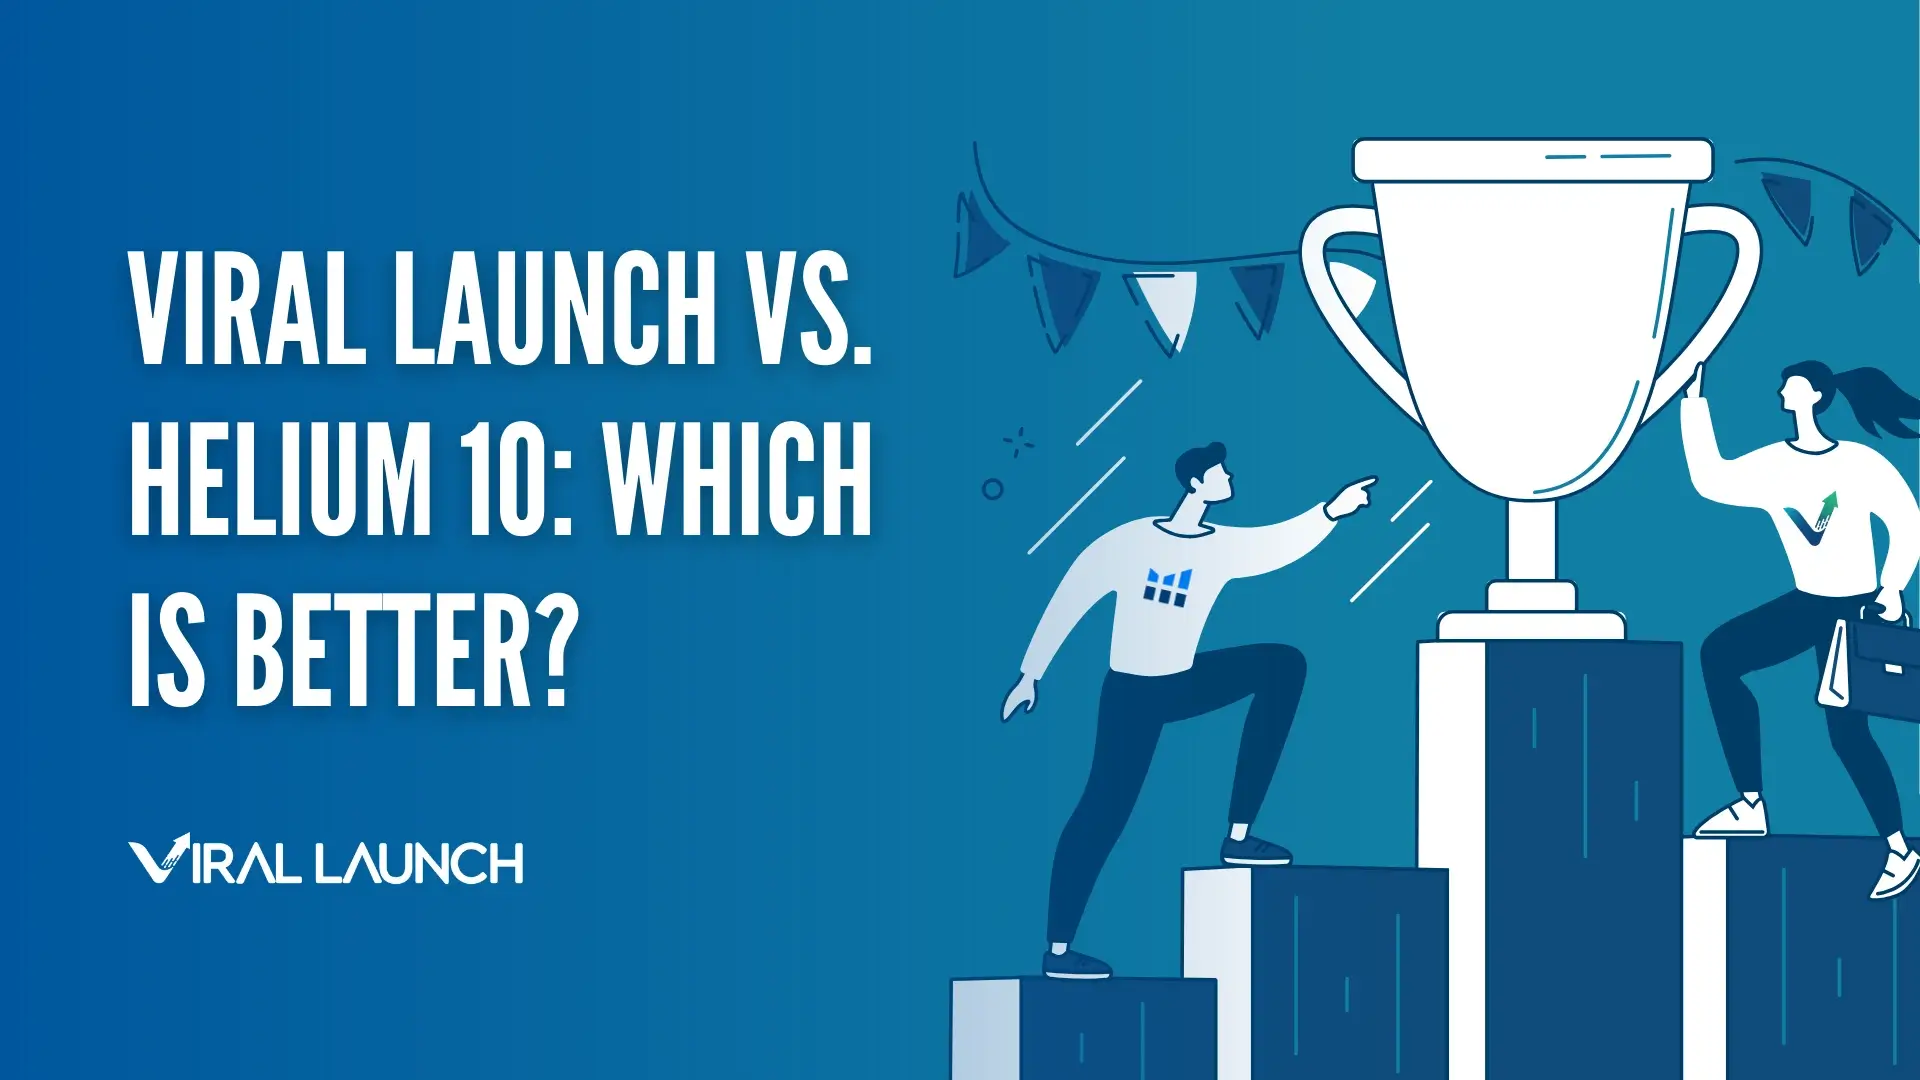 A graphic displaying Viral Launch vs Helium 10: Which is better?